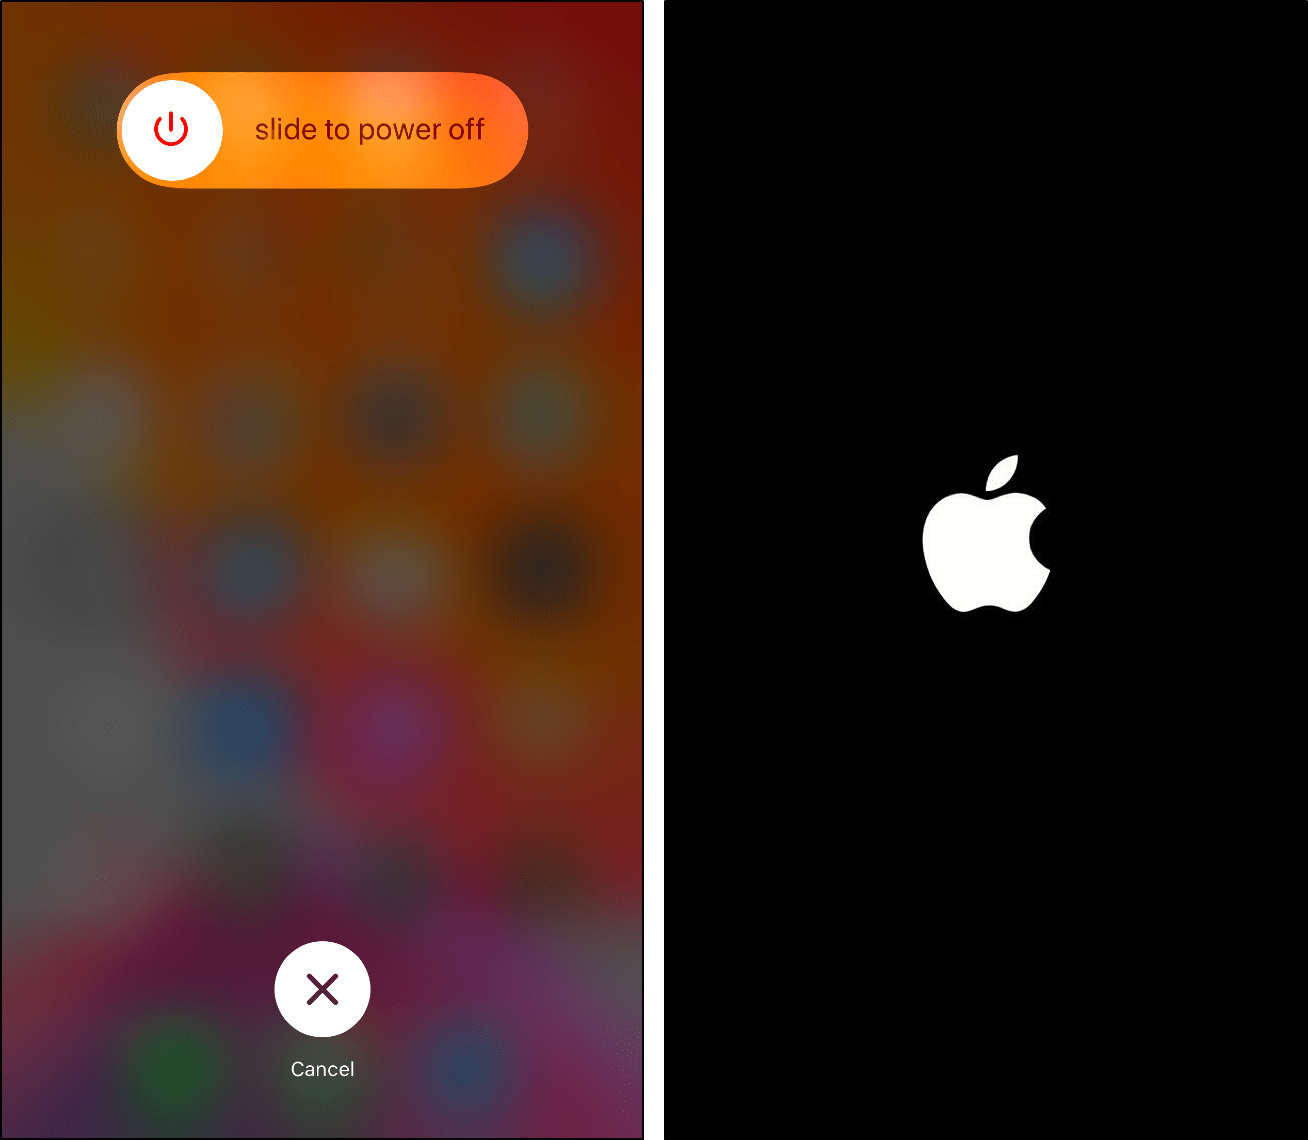 restart iphone to fix the "Unable to Connect Apple Carplay" error